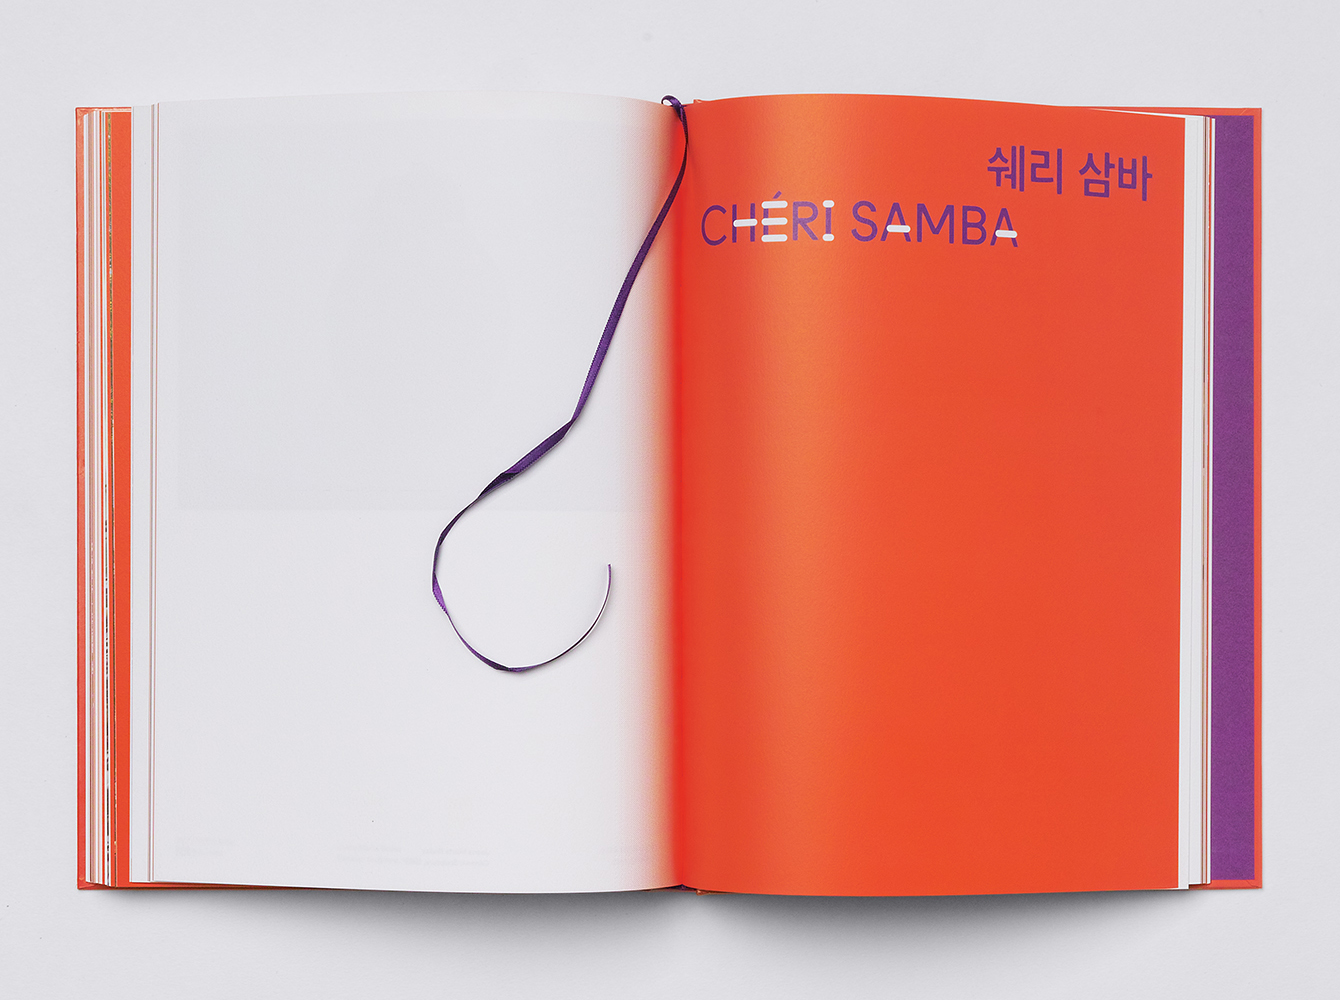 Visual identity and catalogue by Studio fnt for South Korean art exhibition Highlights at SeMA